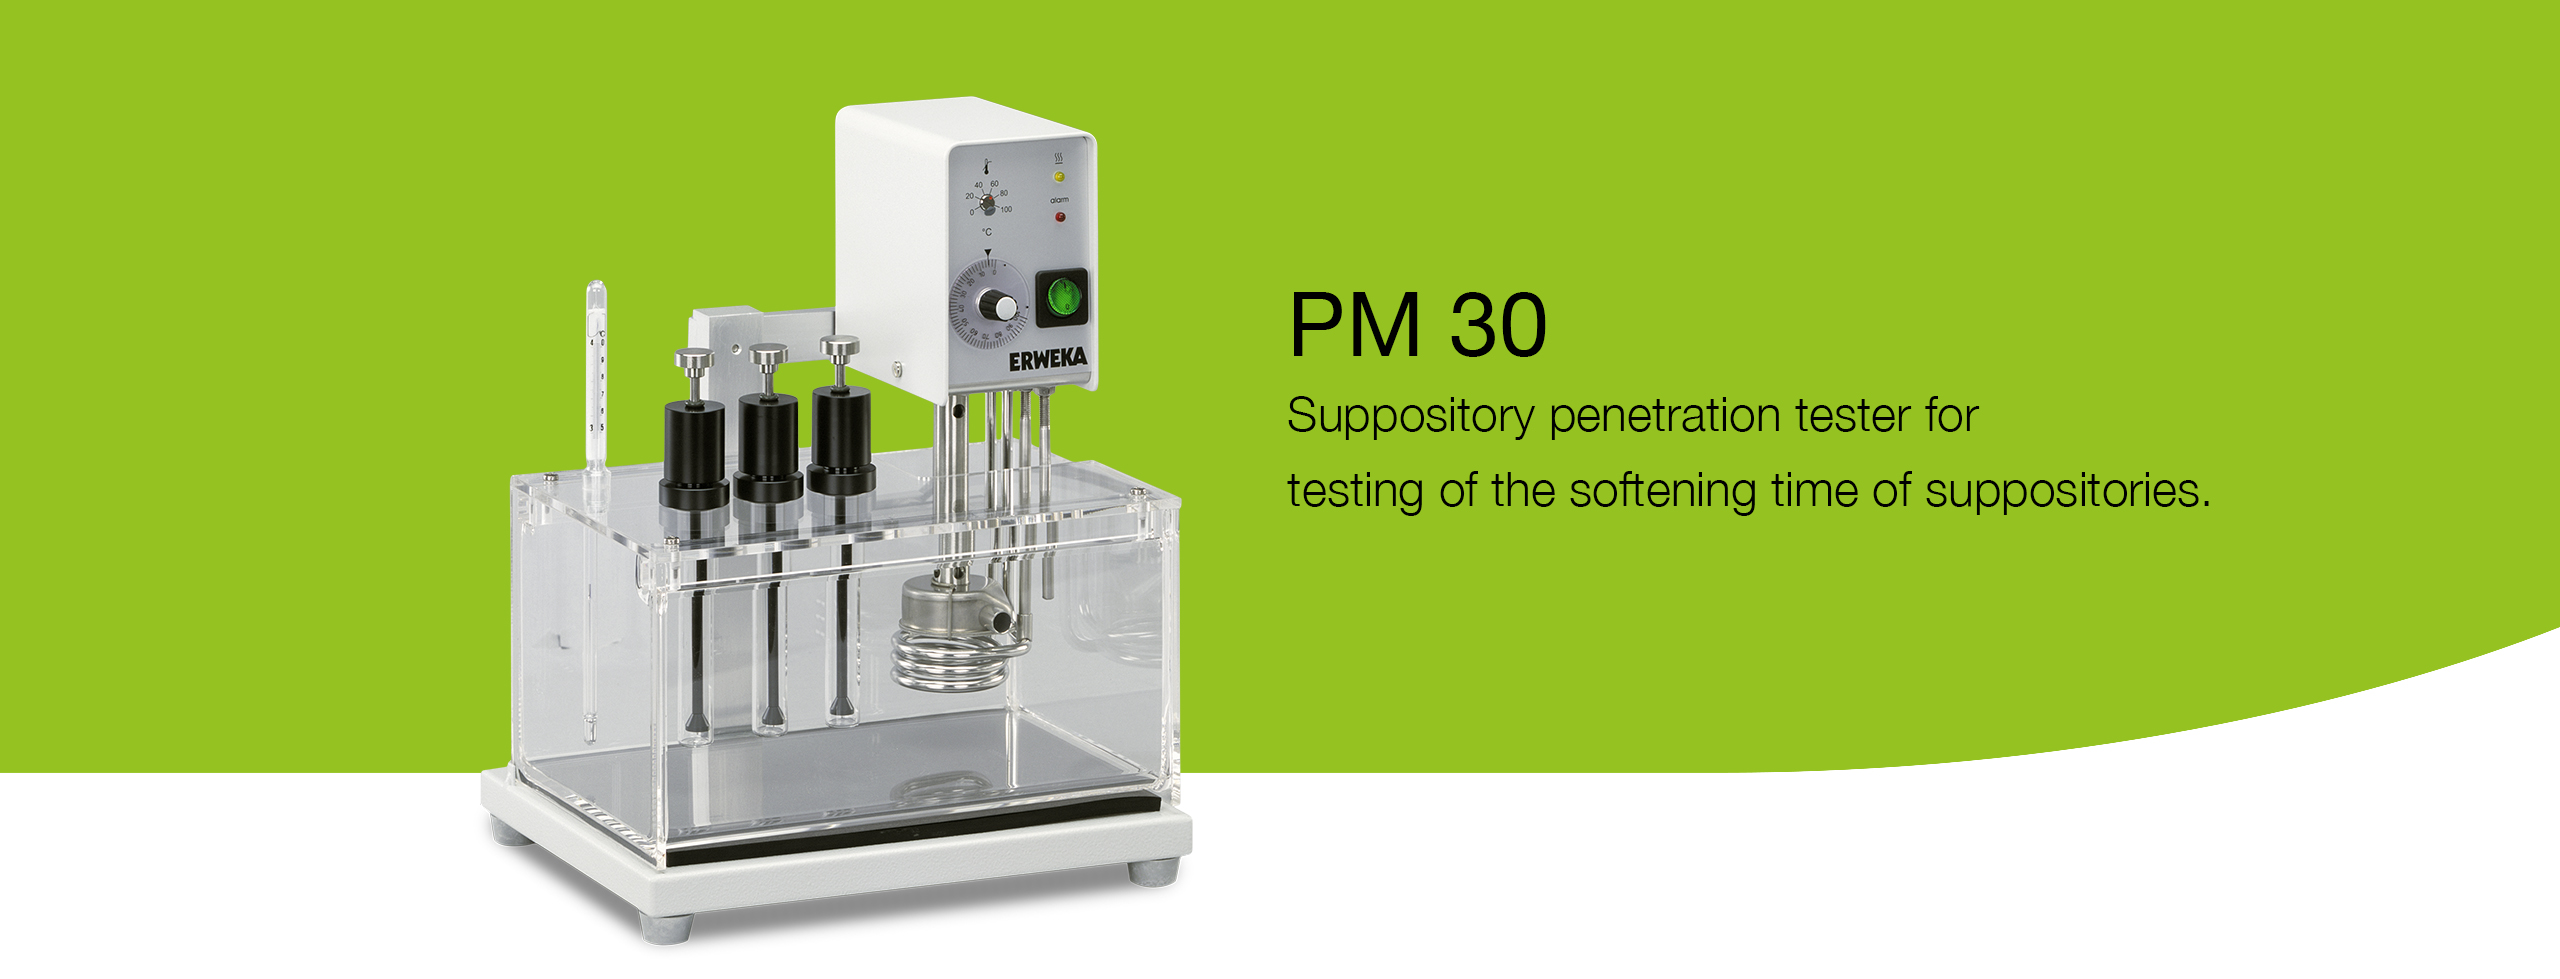 PM 30 Product Page